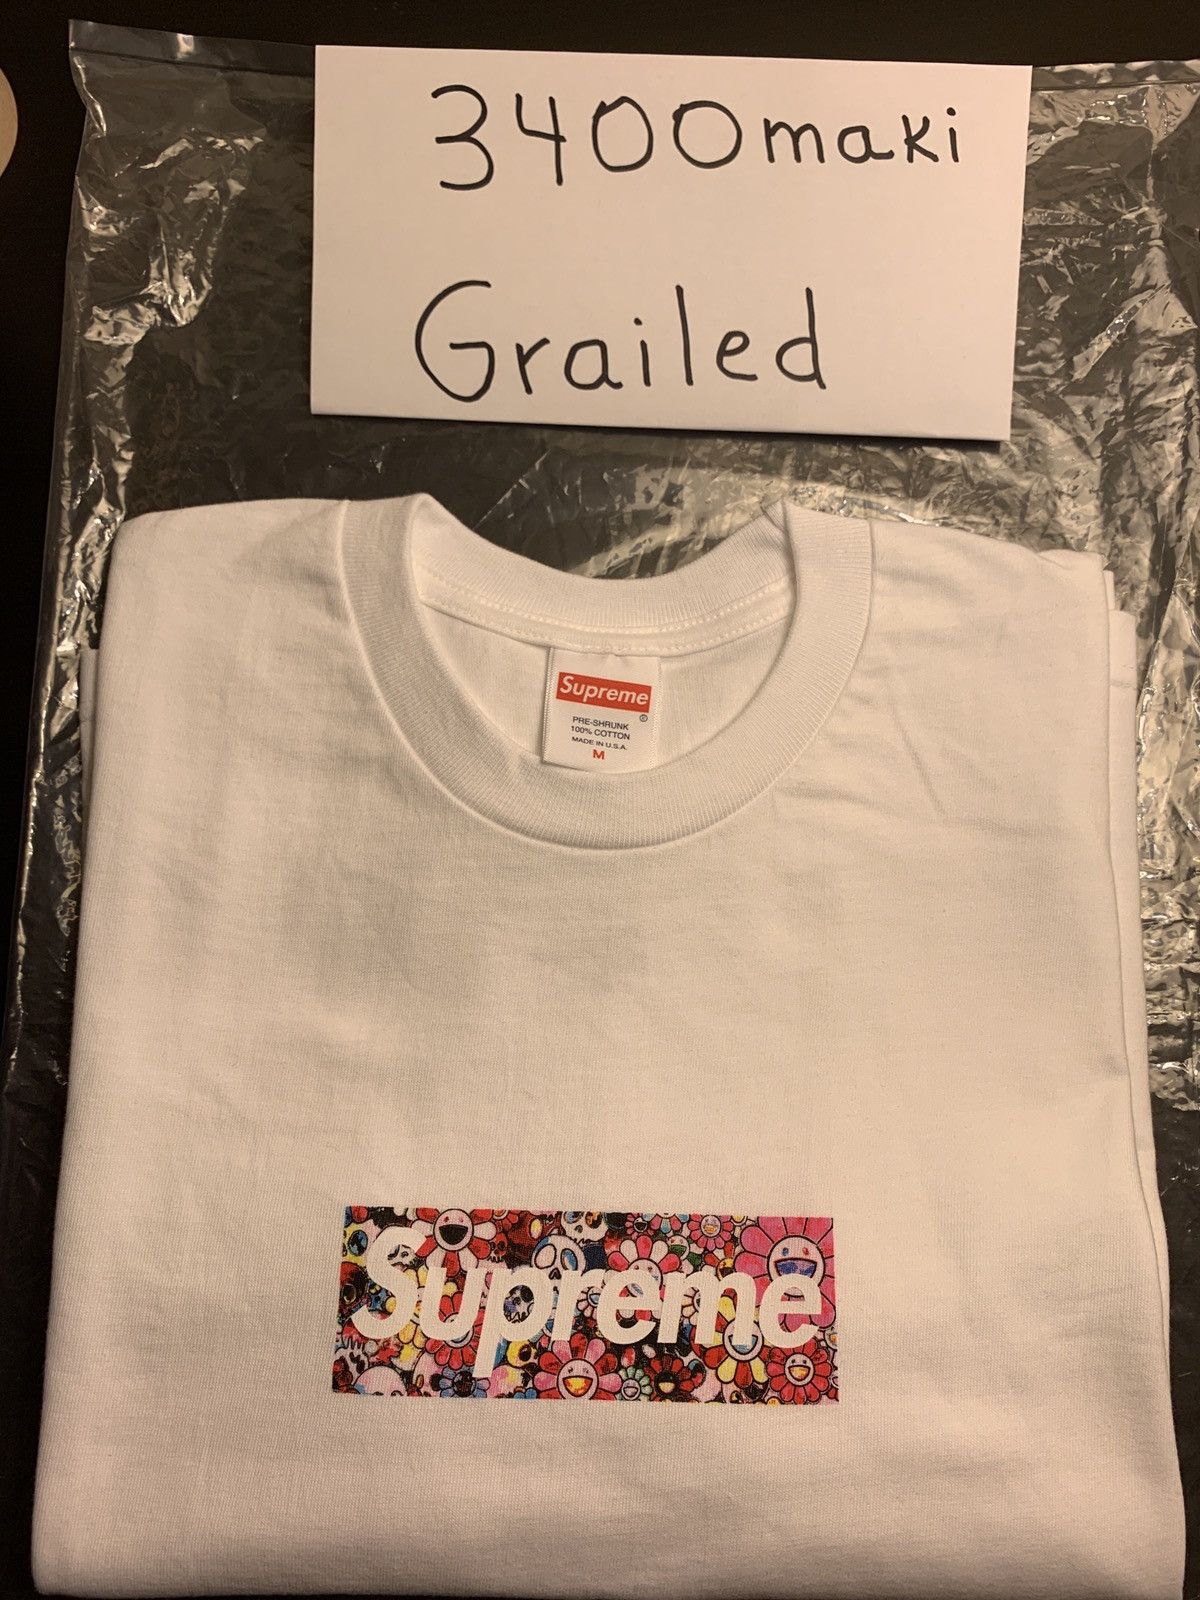 My Supreme x Takashi Murakami collab tee came in the mail today! Copped  manually too. : r/Supreme